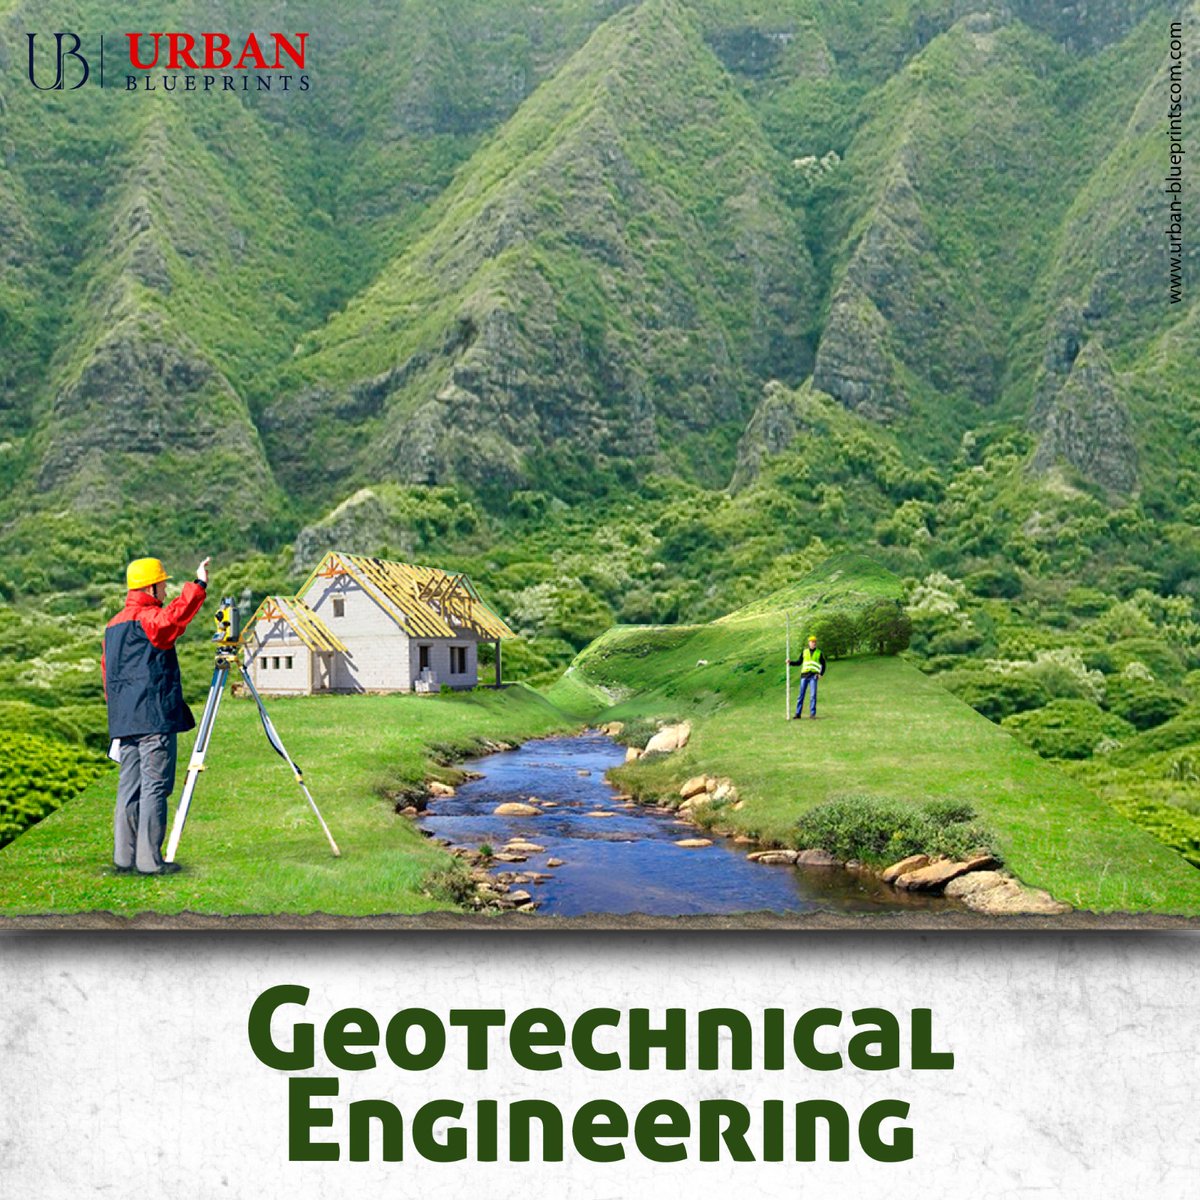 Geotechnical engineering is the bedrock of urban development. From the towering skyscrapers that define our cityscapes to the subterranean infrastructure we often take for granted, geotechnical engineers.🌍👷‍♀️👷‍♂️
.
.
#urbanblueprints #UrbanDevelopment #GeotechnicalEngineering 🚧